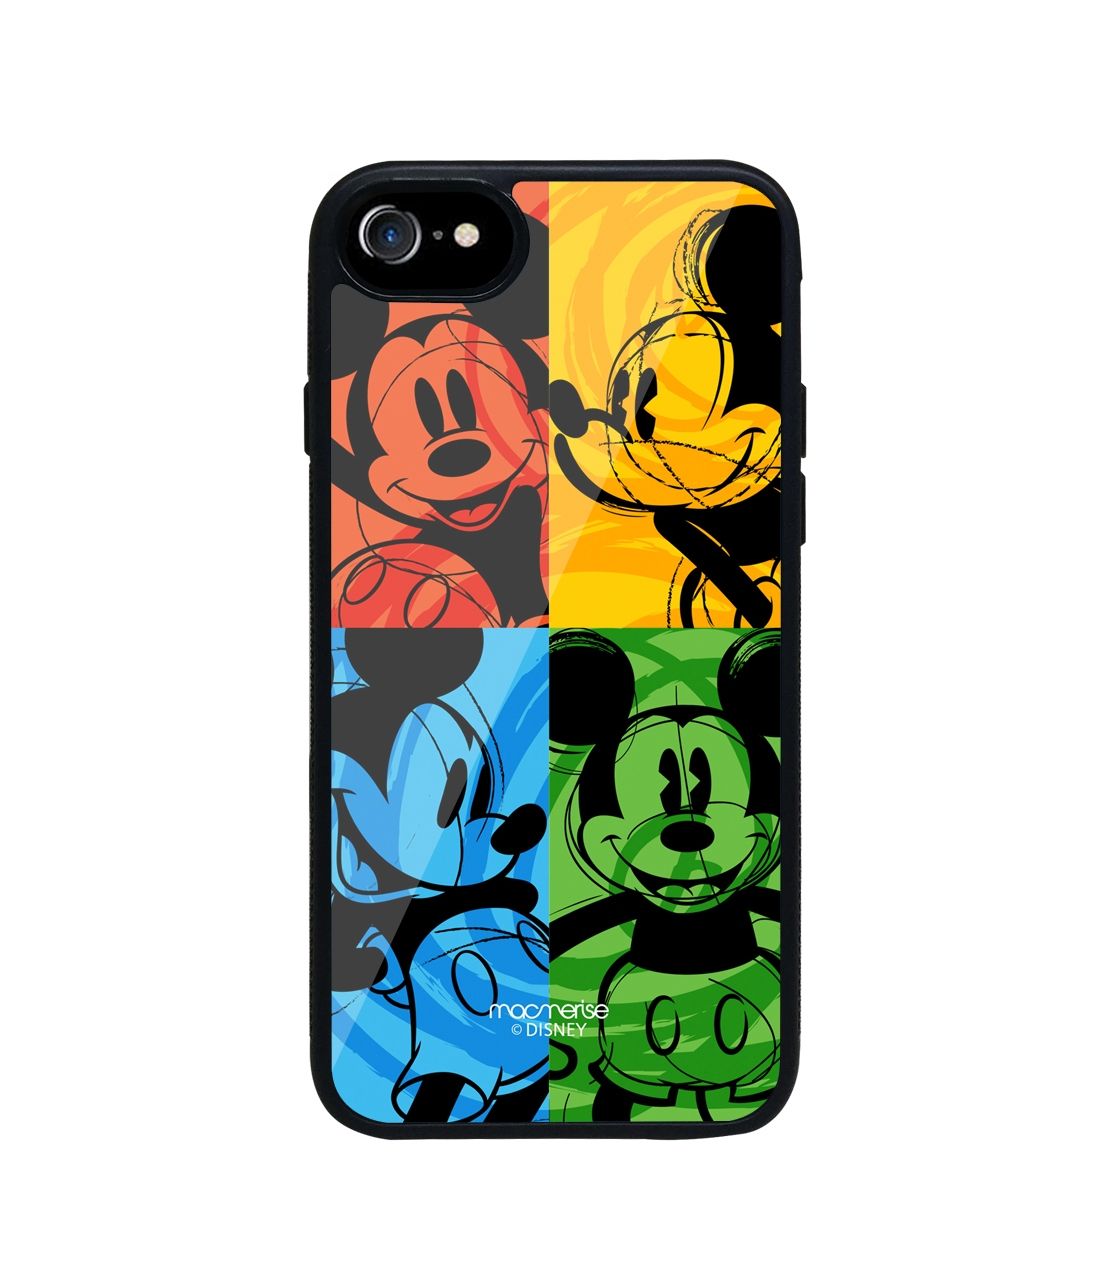 Shades of Mickey - Glass Phone Case for iPhone 7